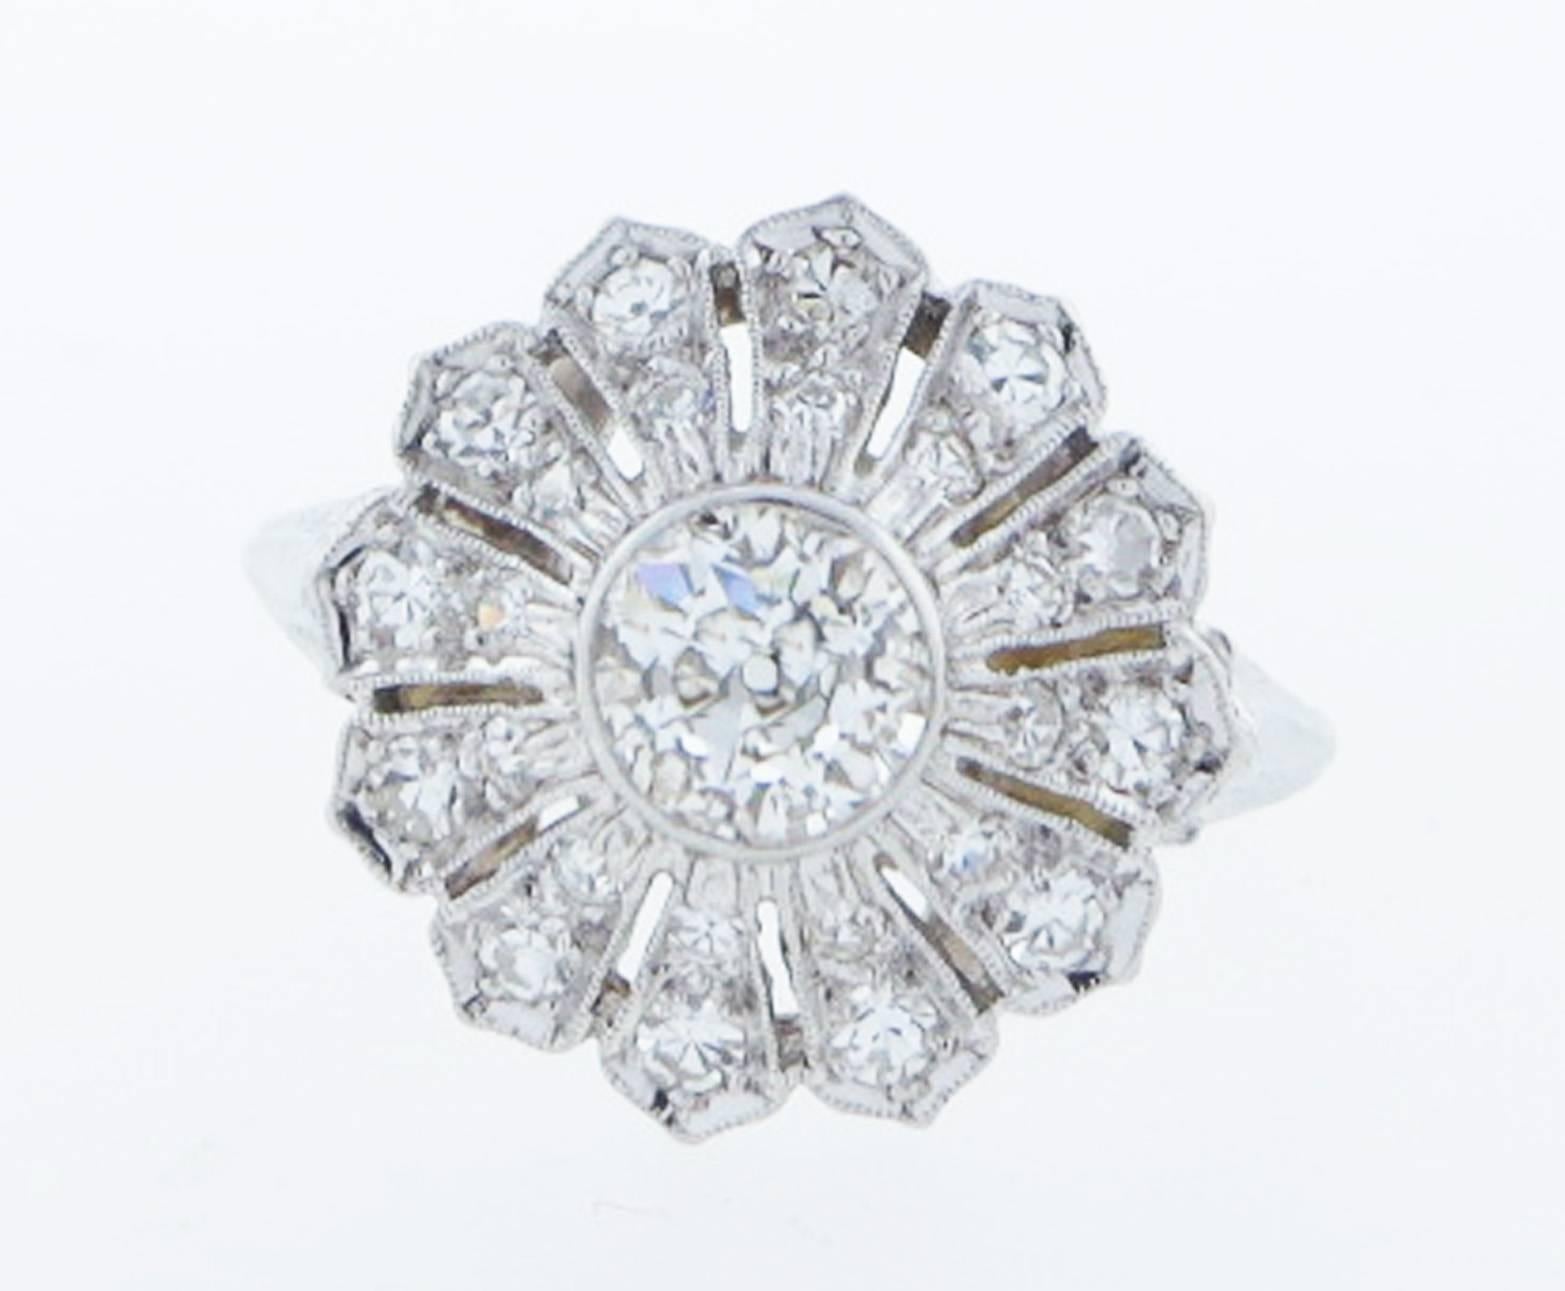 Handmade platinum mount diamond ring in a flower design. The center is bezel set with a round European cut diamond weighing approx .70cts. The surrounding mount is bead set with 24 old cut diamonds totaling approx 30cts.
The ring is size 7 3/4 and